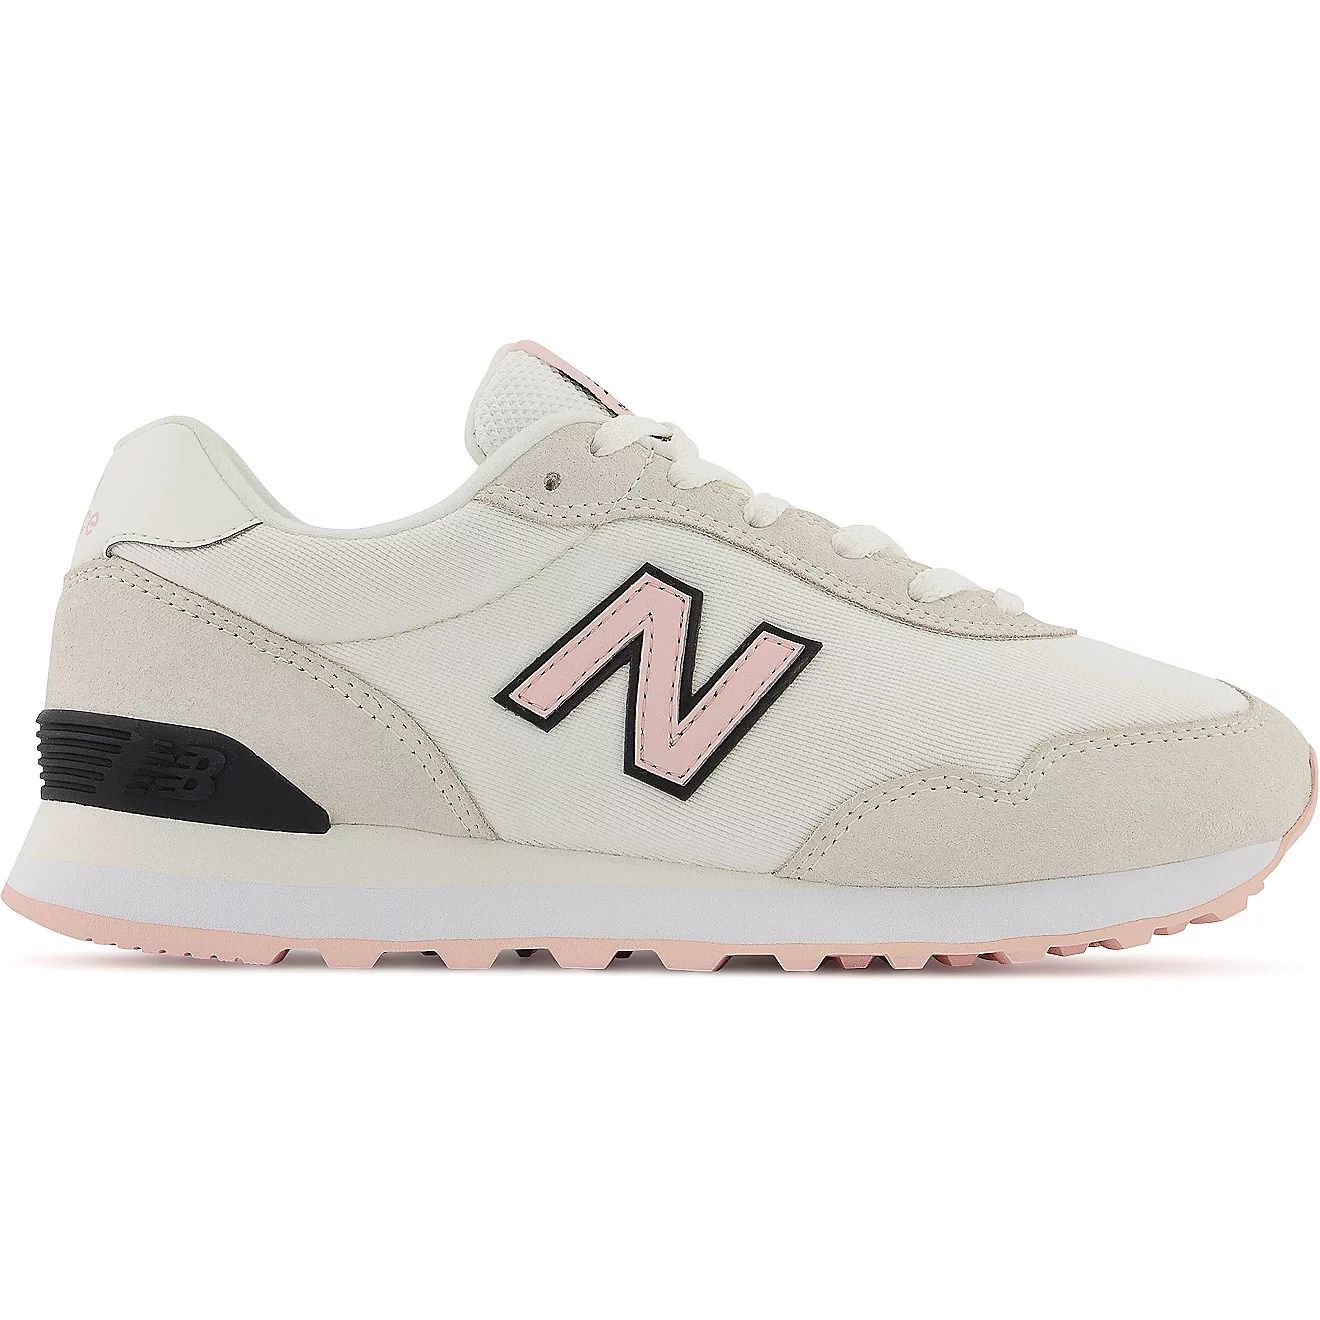 New Balance Women's 515 v3 Shoes | Academy | Academy Sports + Outdoors